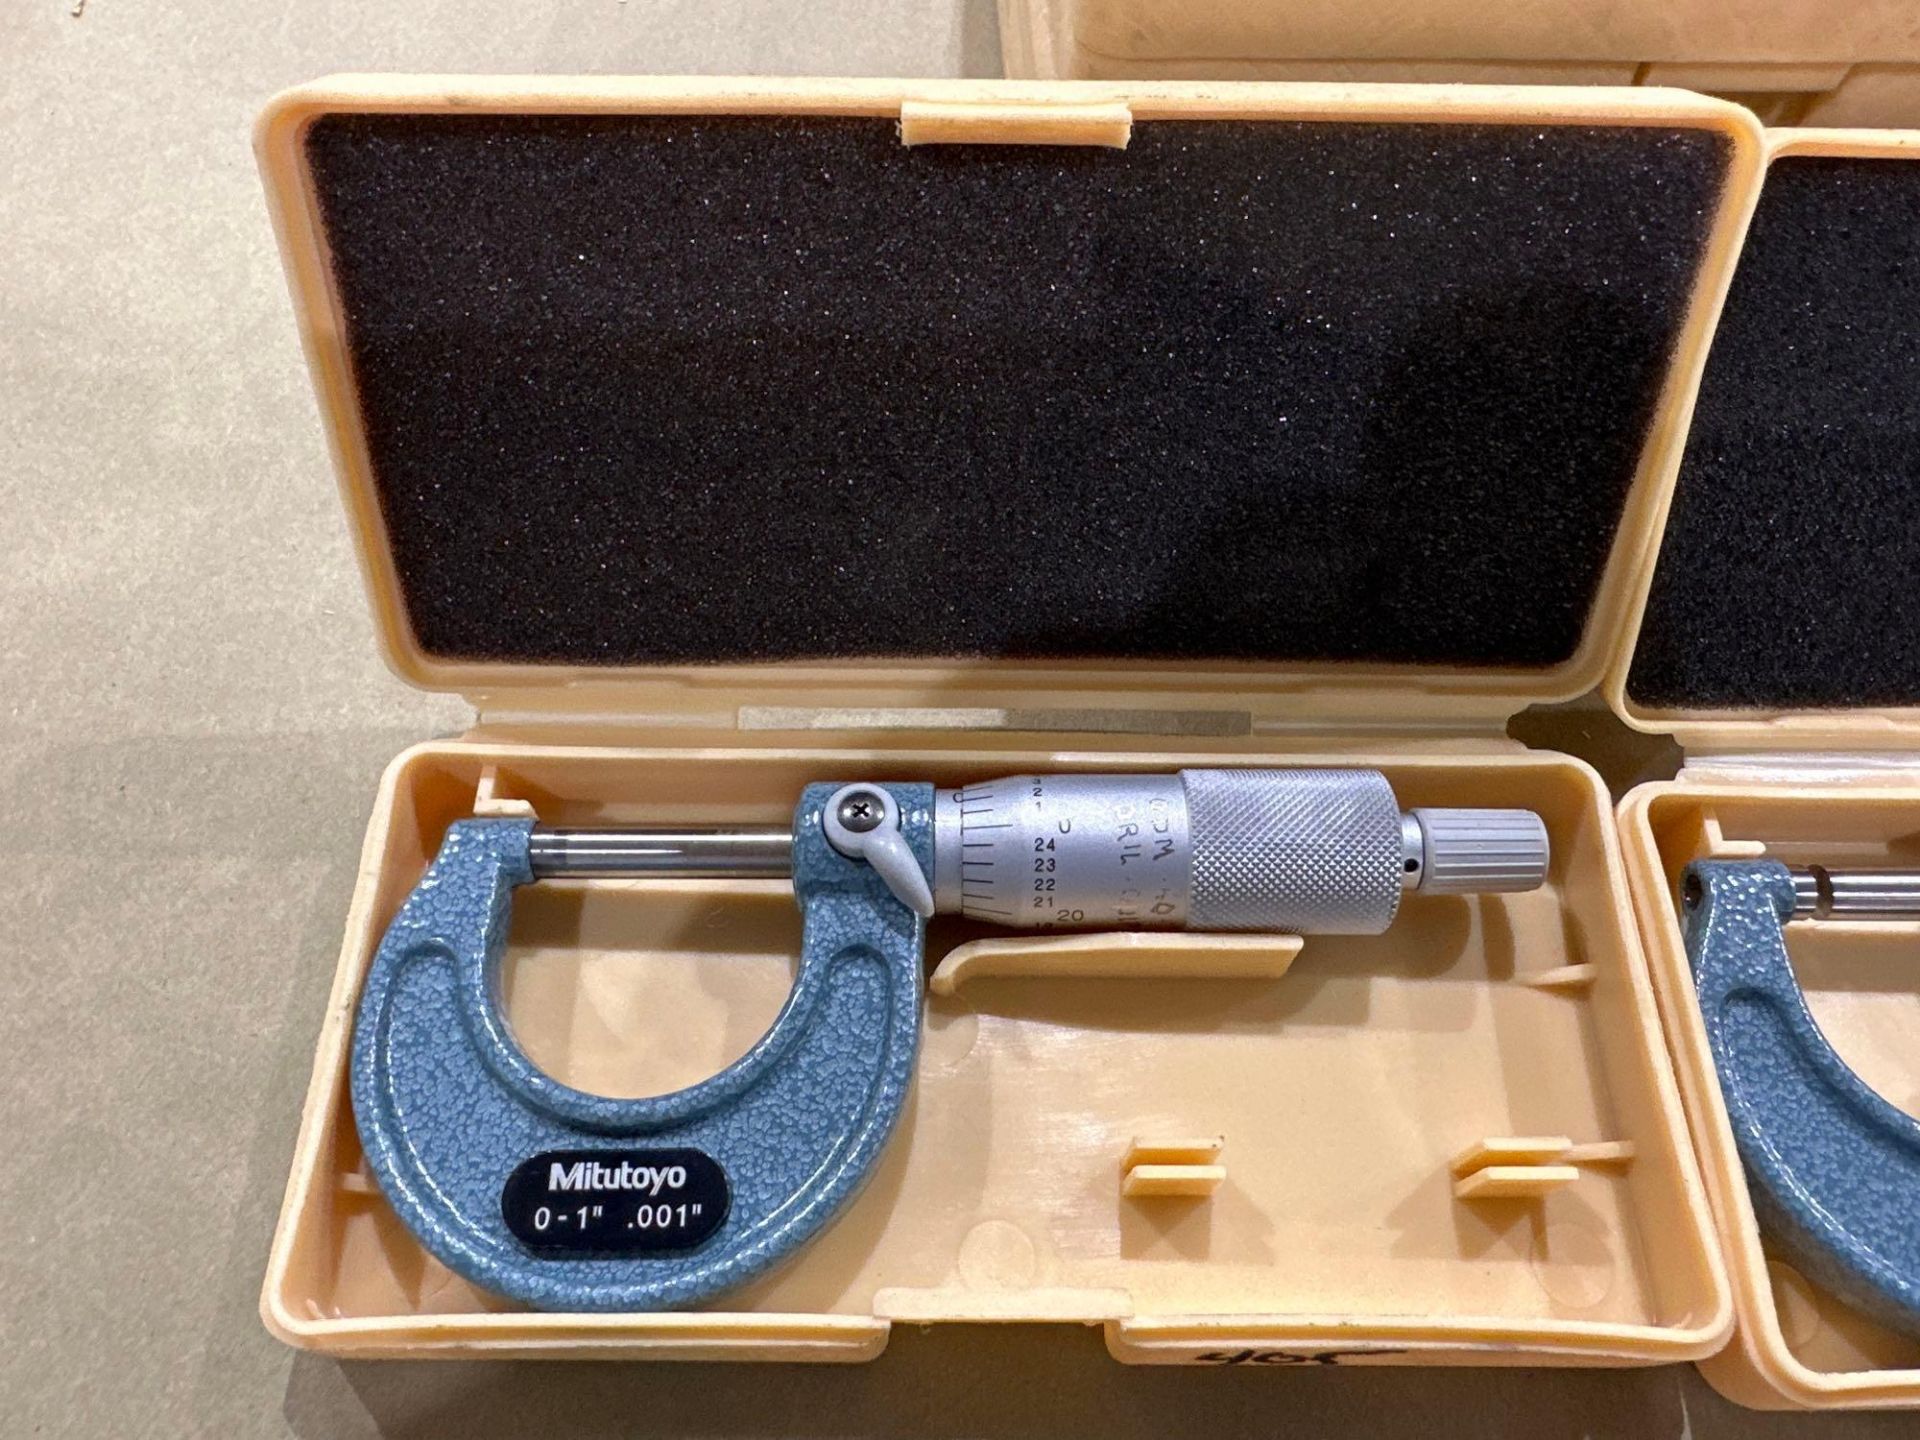 Lot of 12: Mitutoyo Mechanical OD Micrometer M110-1”, 0-1” Range, .001” Graduation, in plastic boxes - Image 6 of 6